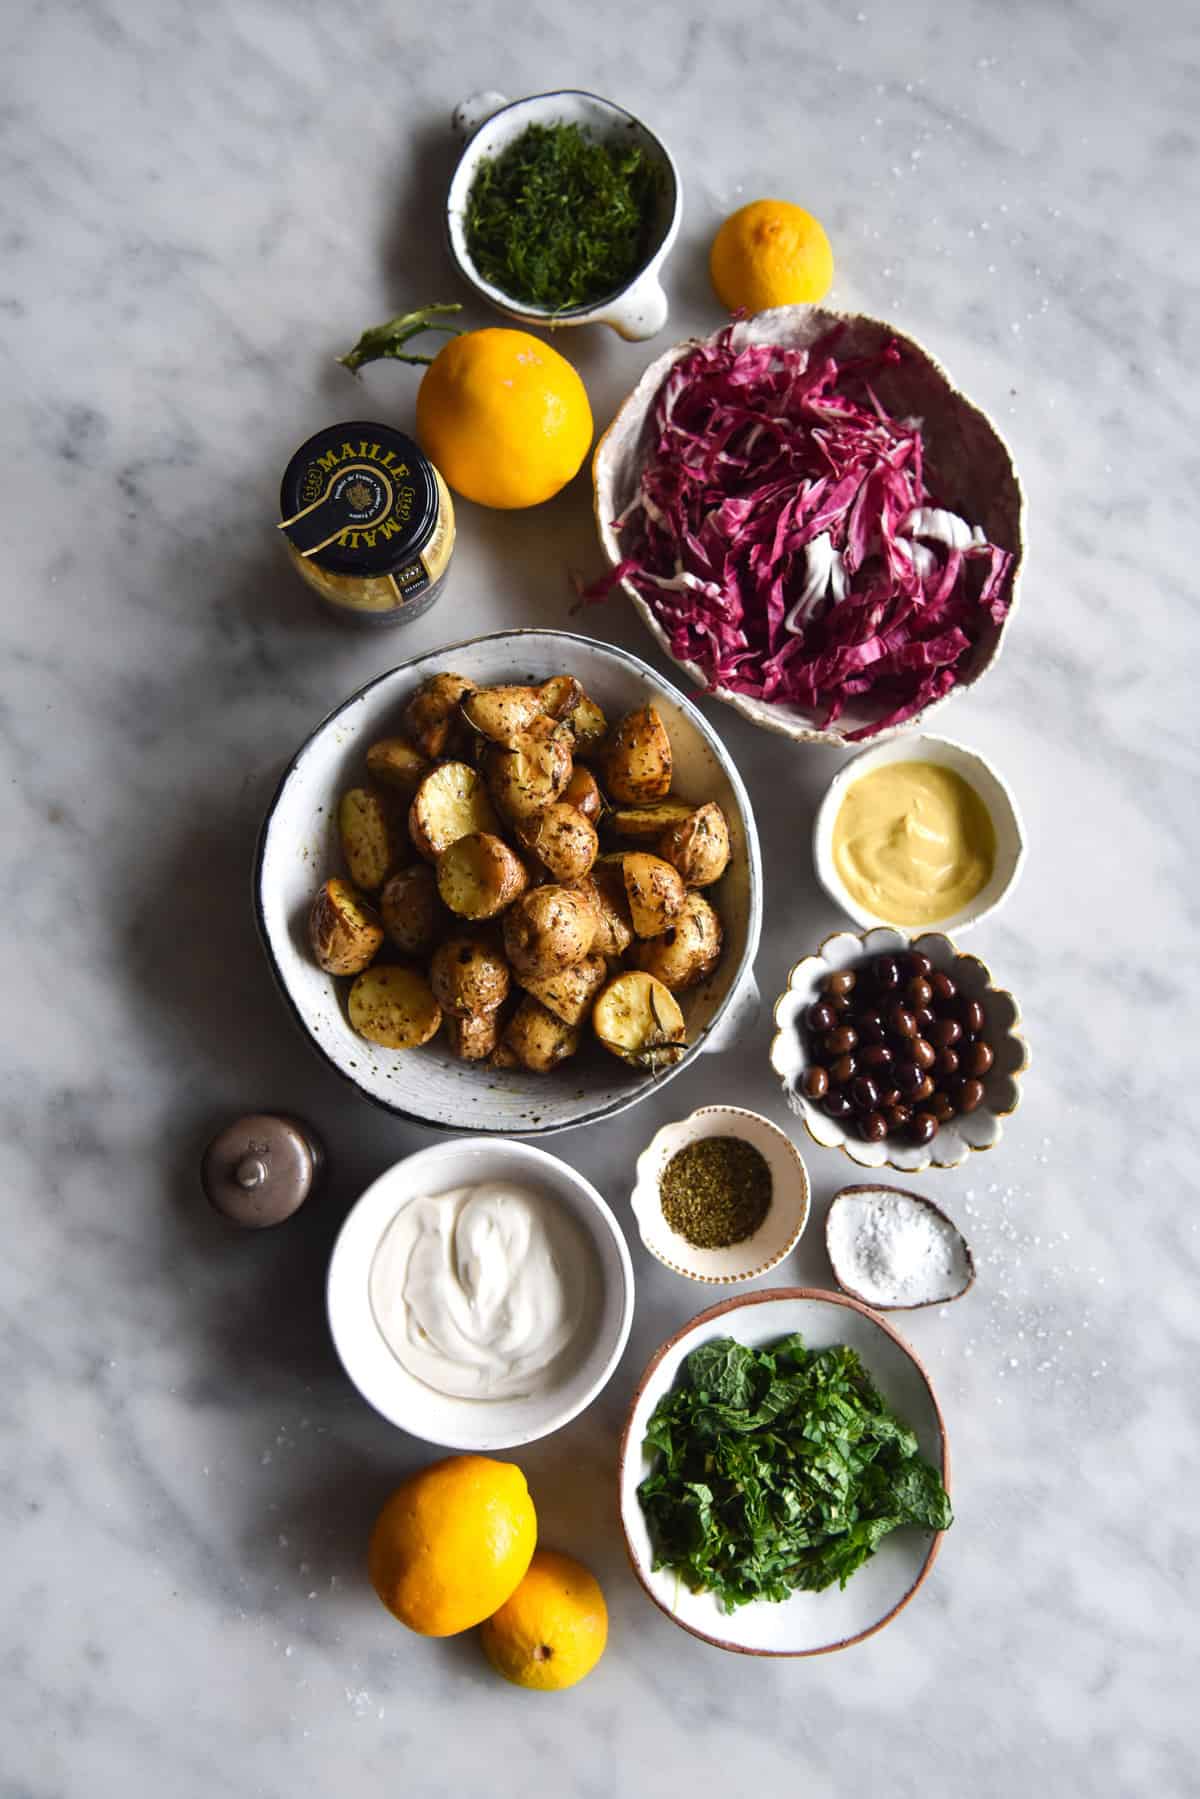 An aerial image of the ingredients used to make a low FODMAP vegan potato salad arranged in small ceramic bowls on a white marble table. 